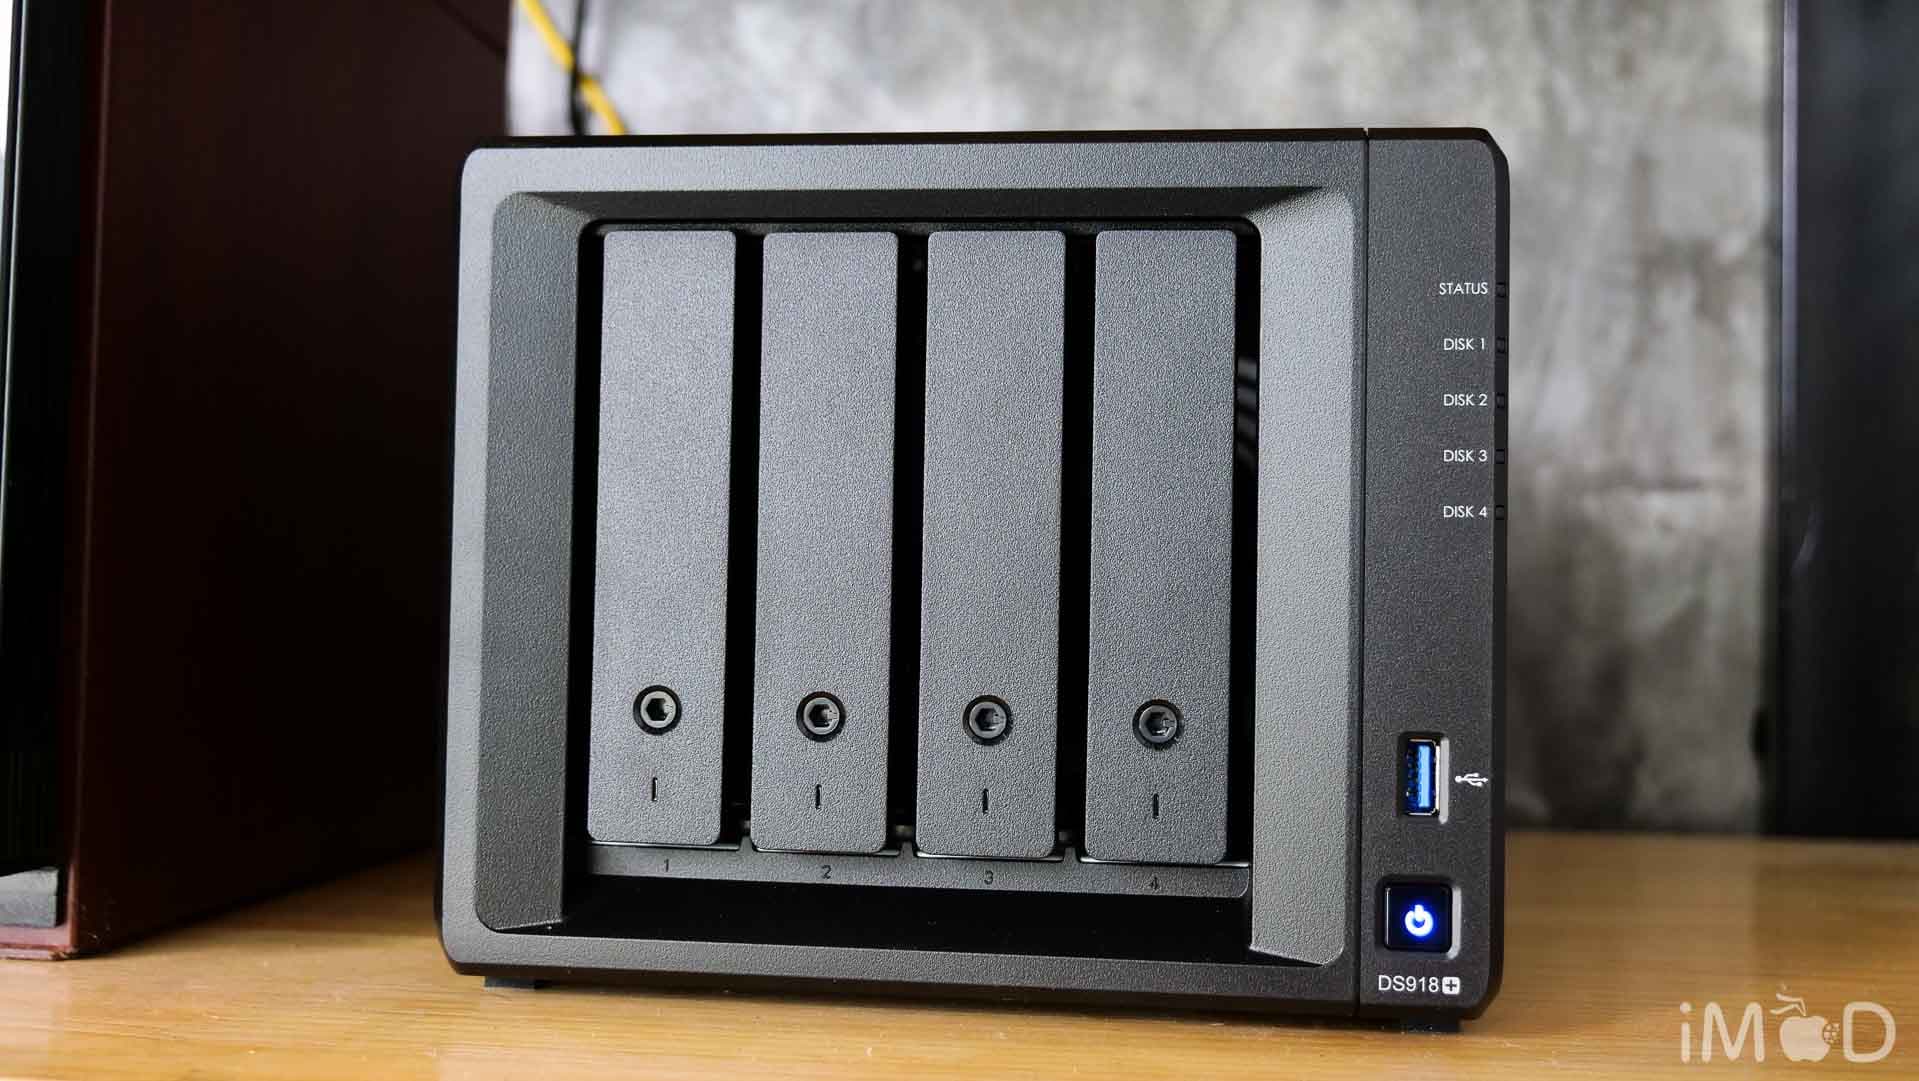 Synology Ds 918 Plus 5728